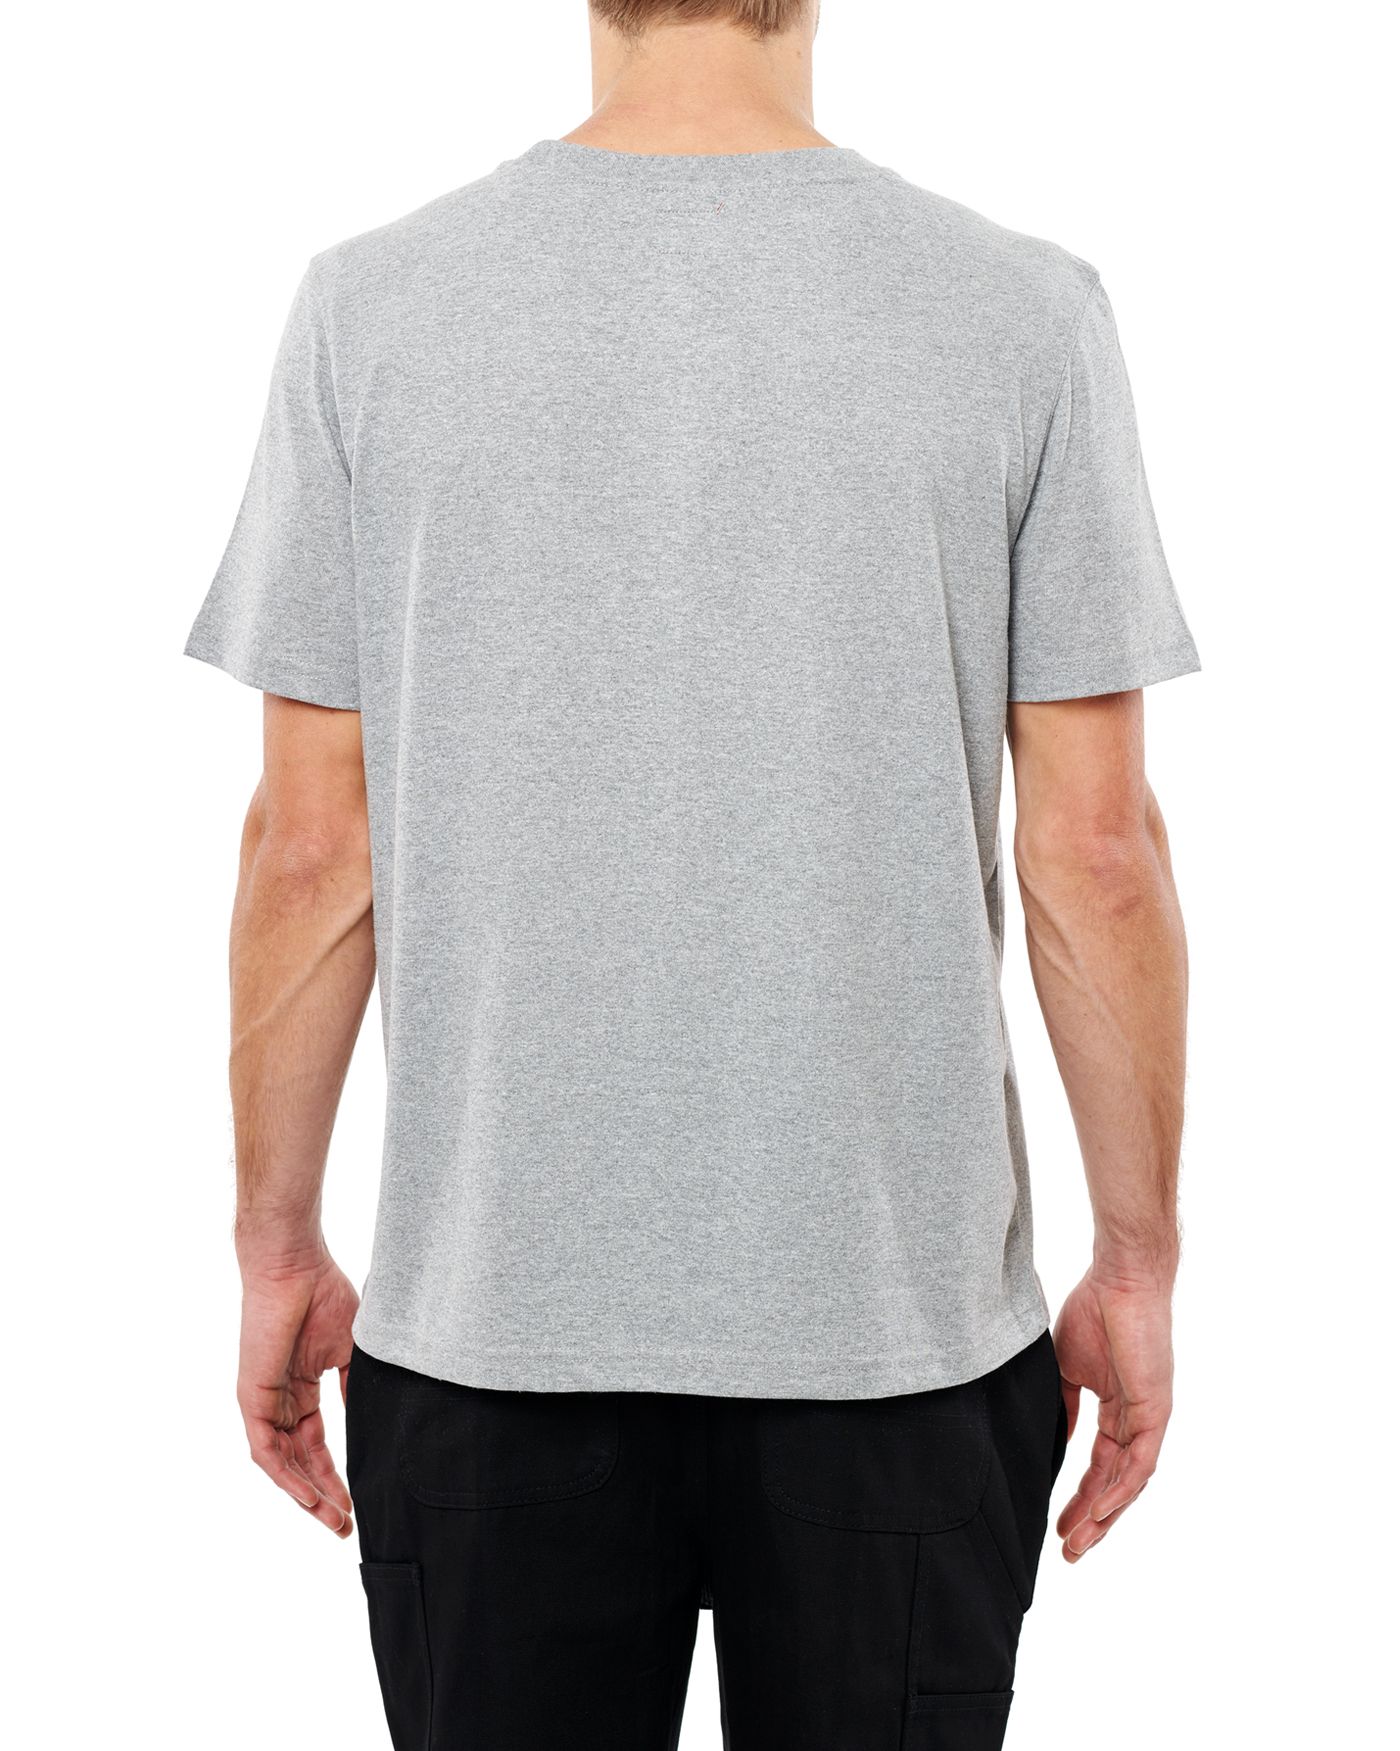 Photo of Outlaw Pete S/S T-shirt, Grey Melange